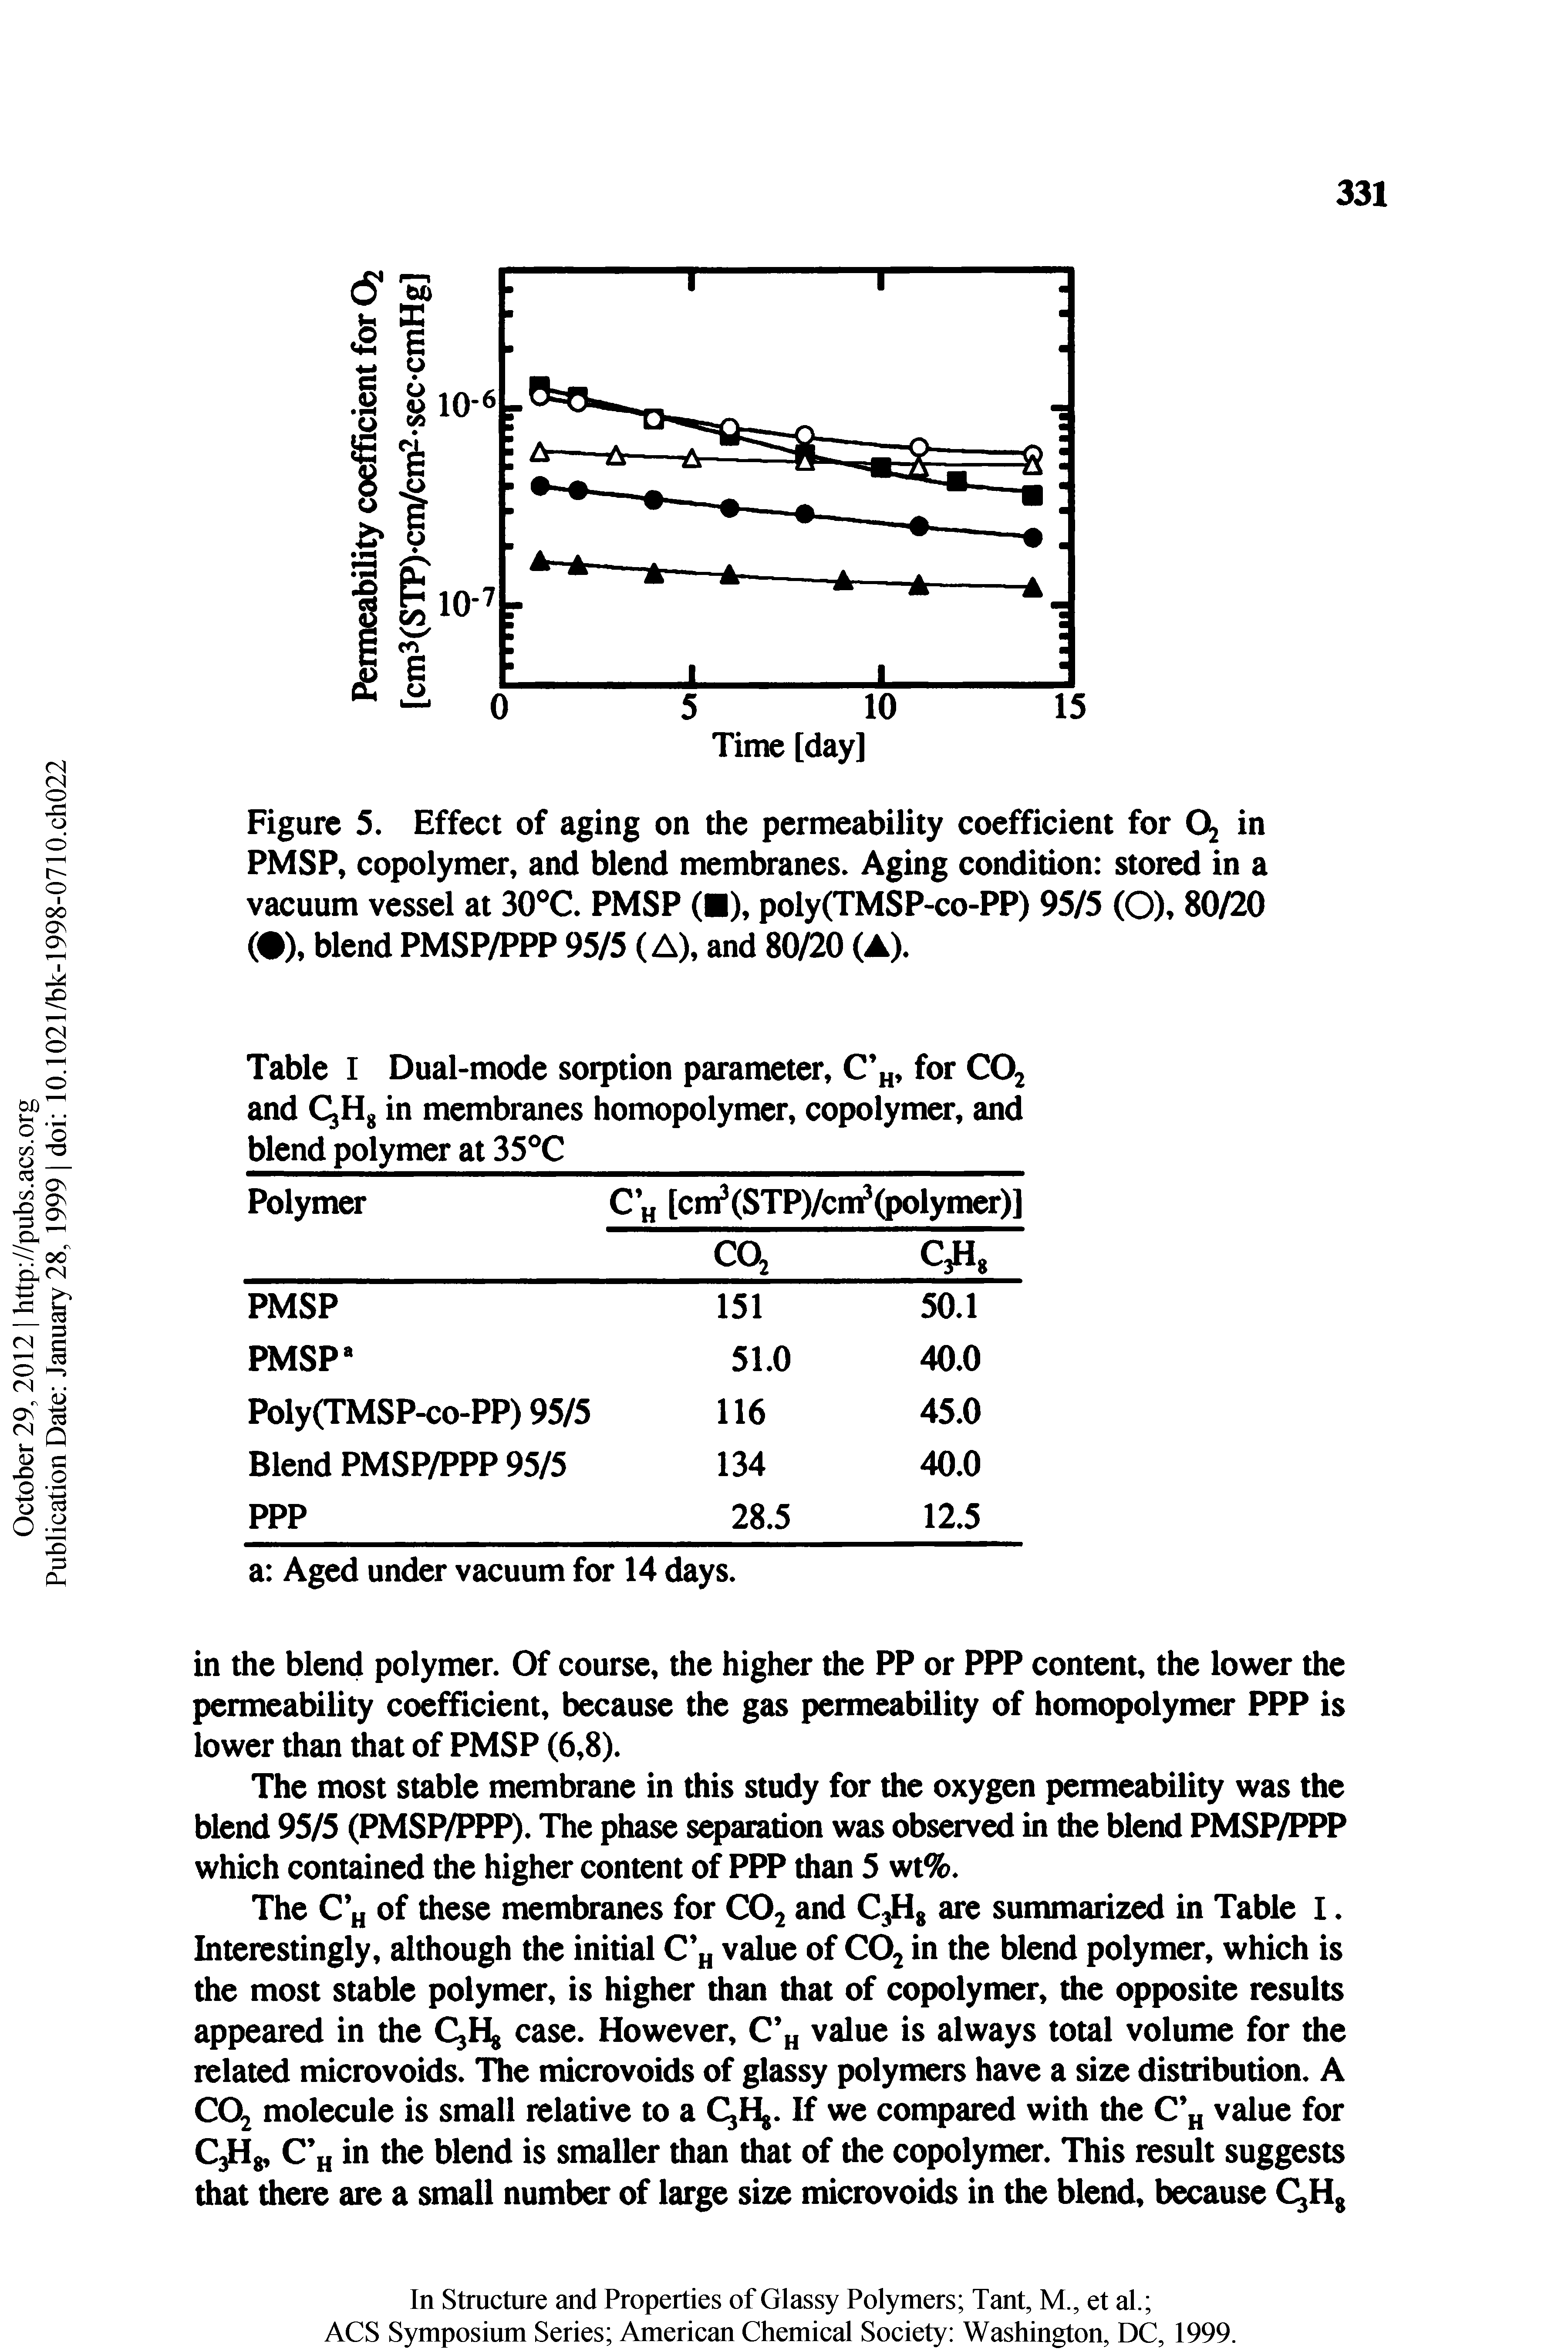 Figure 5. Effect of aging on the permeability coefficient for in PMSP, copolymer, and blend membranes. Aging condition stored in a vacuum vessel at 30 C. PMSP ( ), poly(TMSP-co-PP) 95/5 (O), 80/20 ( ), blend PMSP/PPP 95/5 (A), and 80/20 (A).